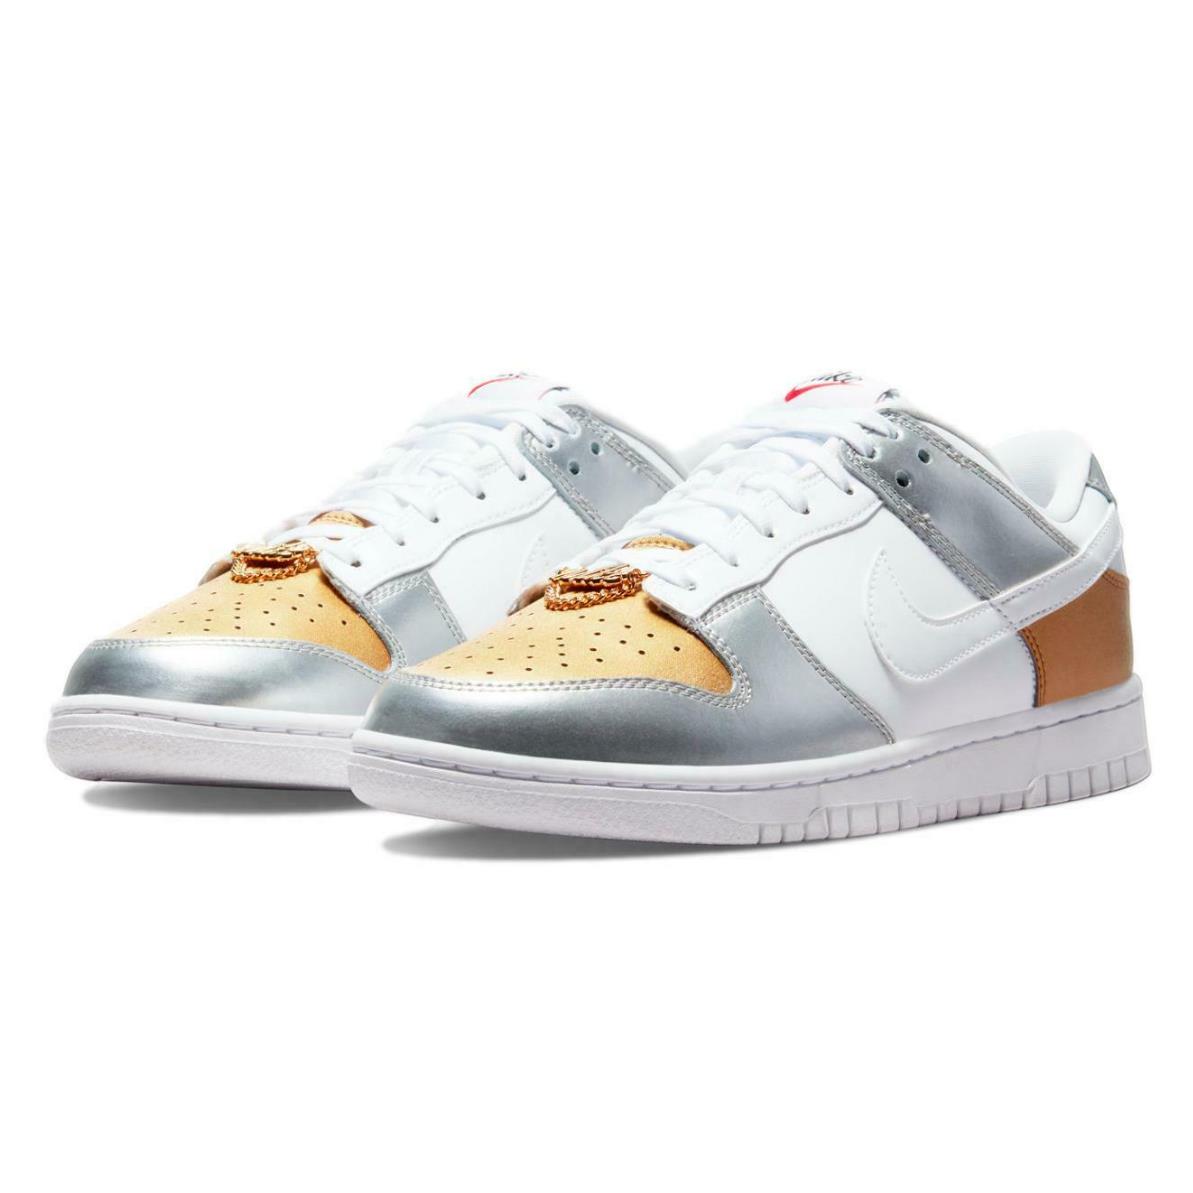 Nike Women`s Dunk Low SE Shoes `heirloom` Gold White Silver DH4403-700 - Multicolor